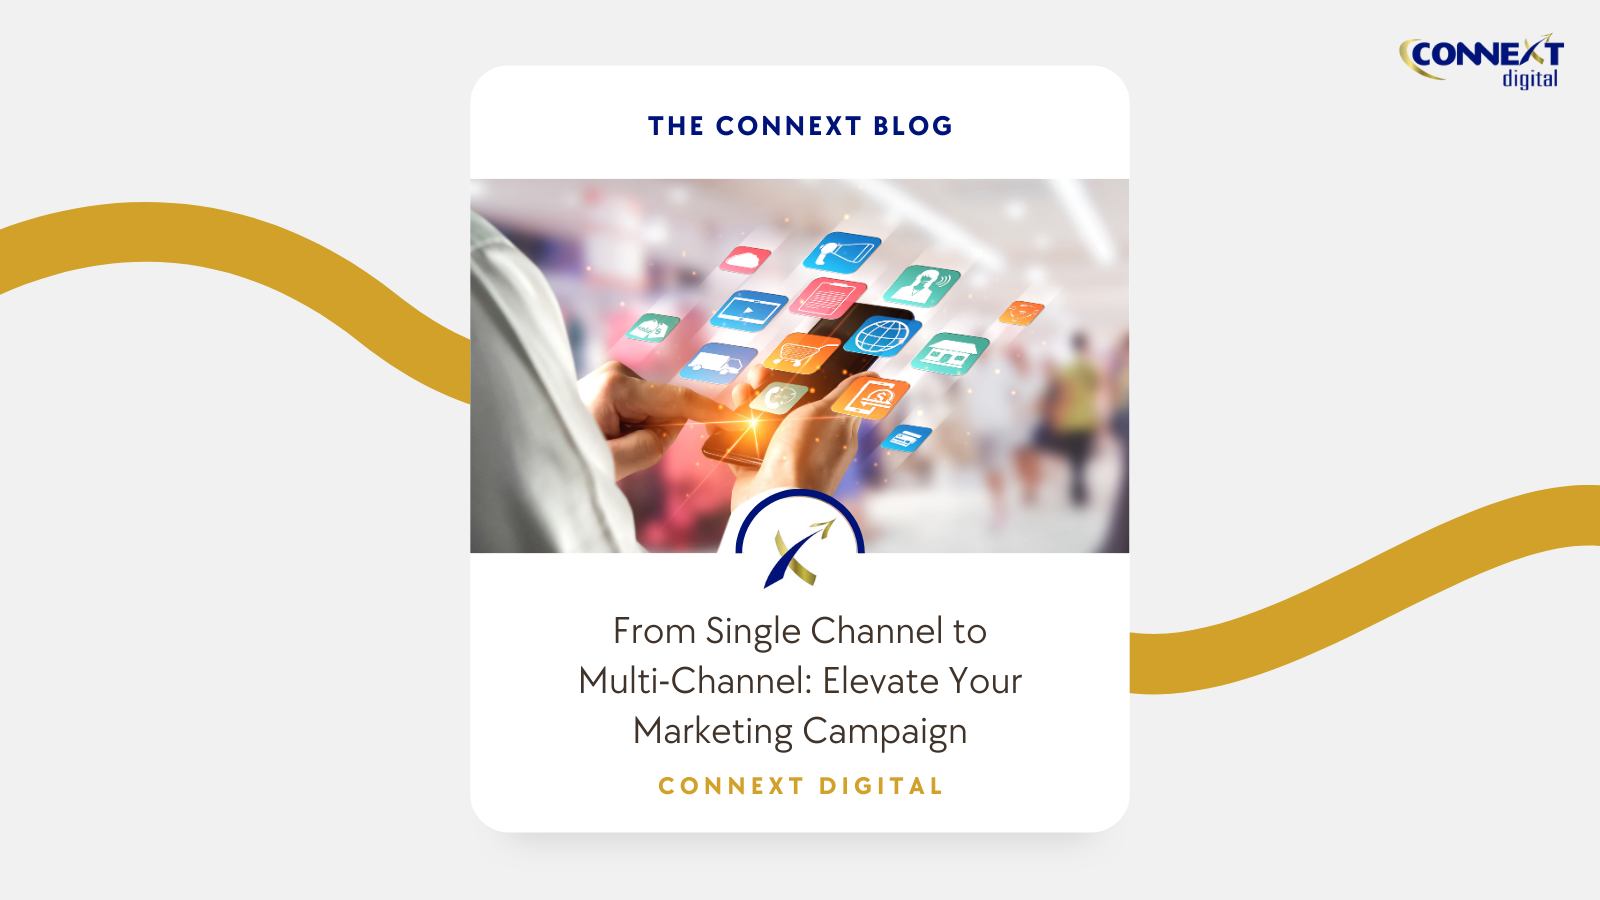 From Single Channel to Multi-Channel: Elevate Your Marketing Campaign